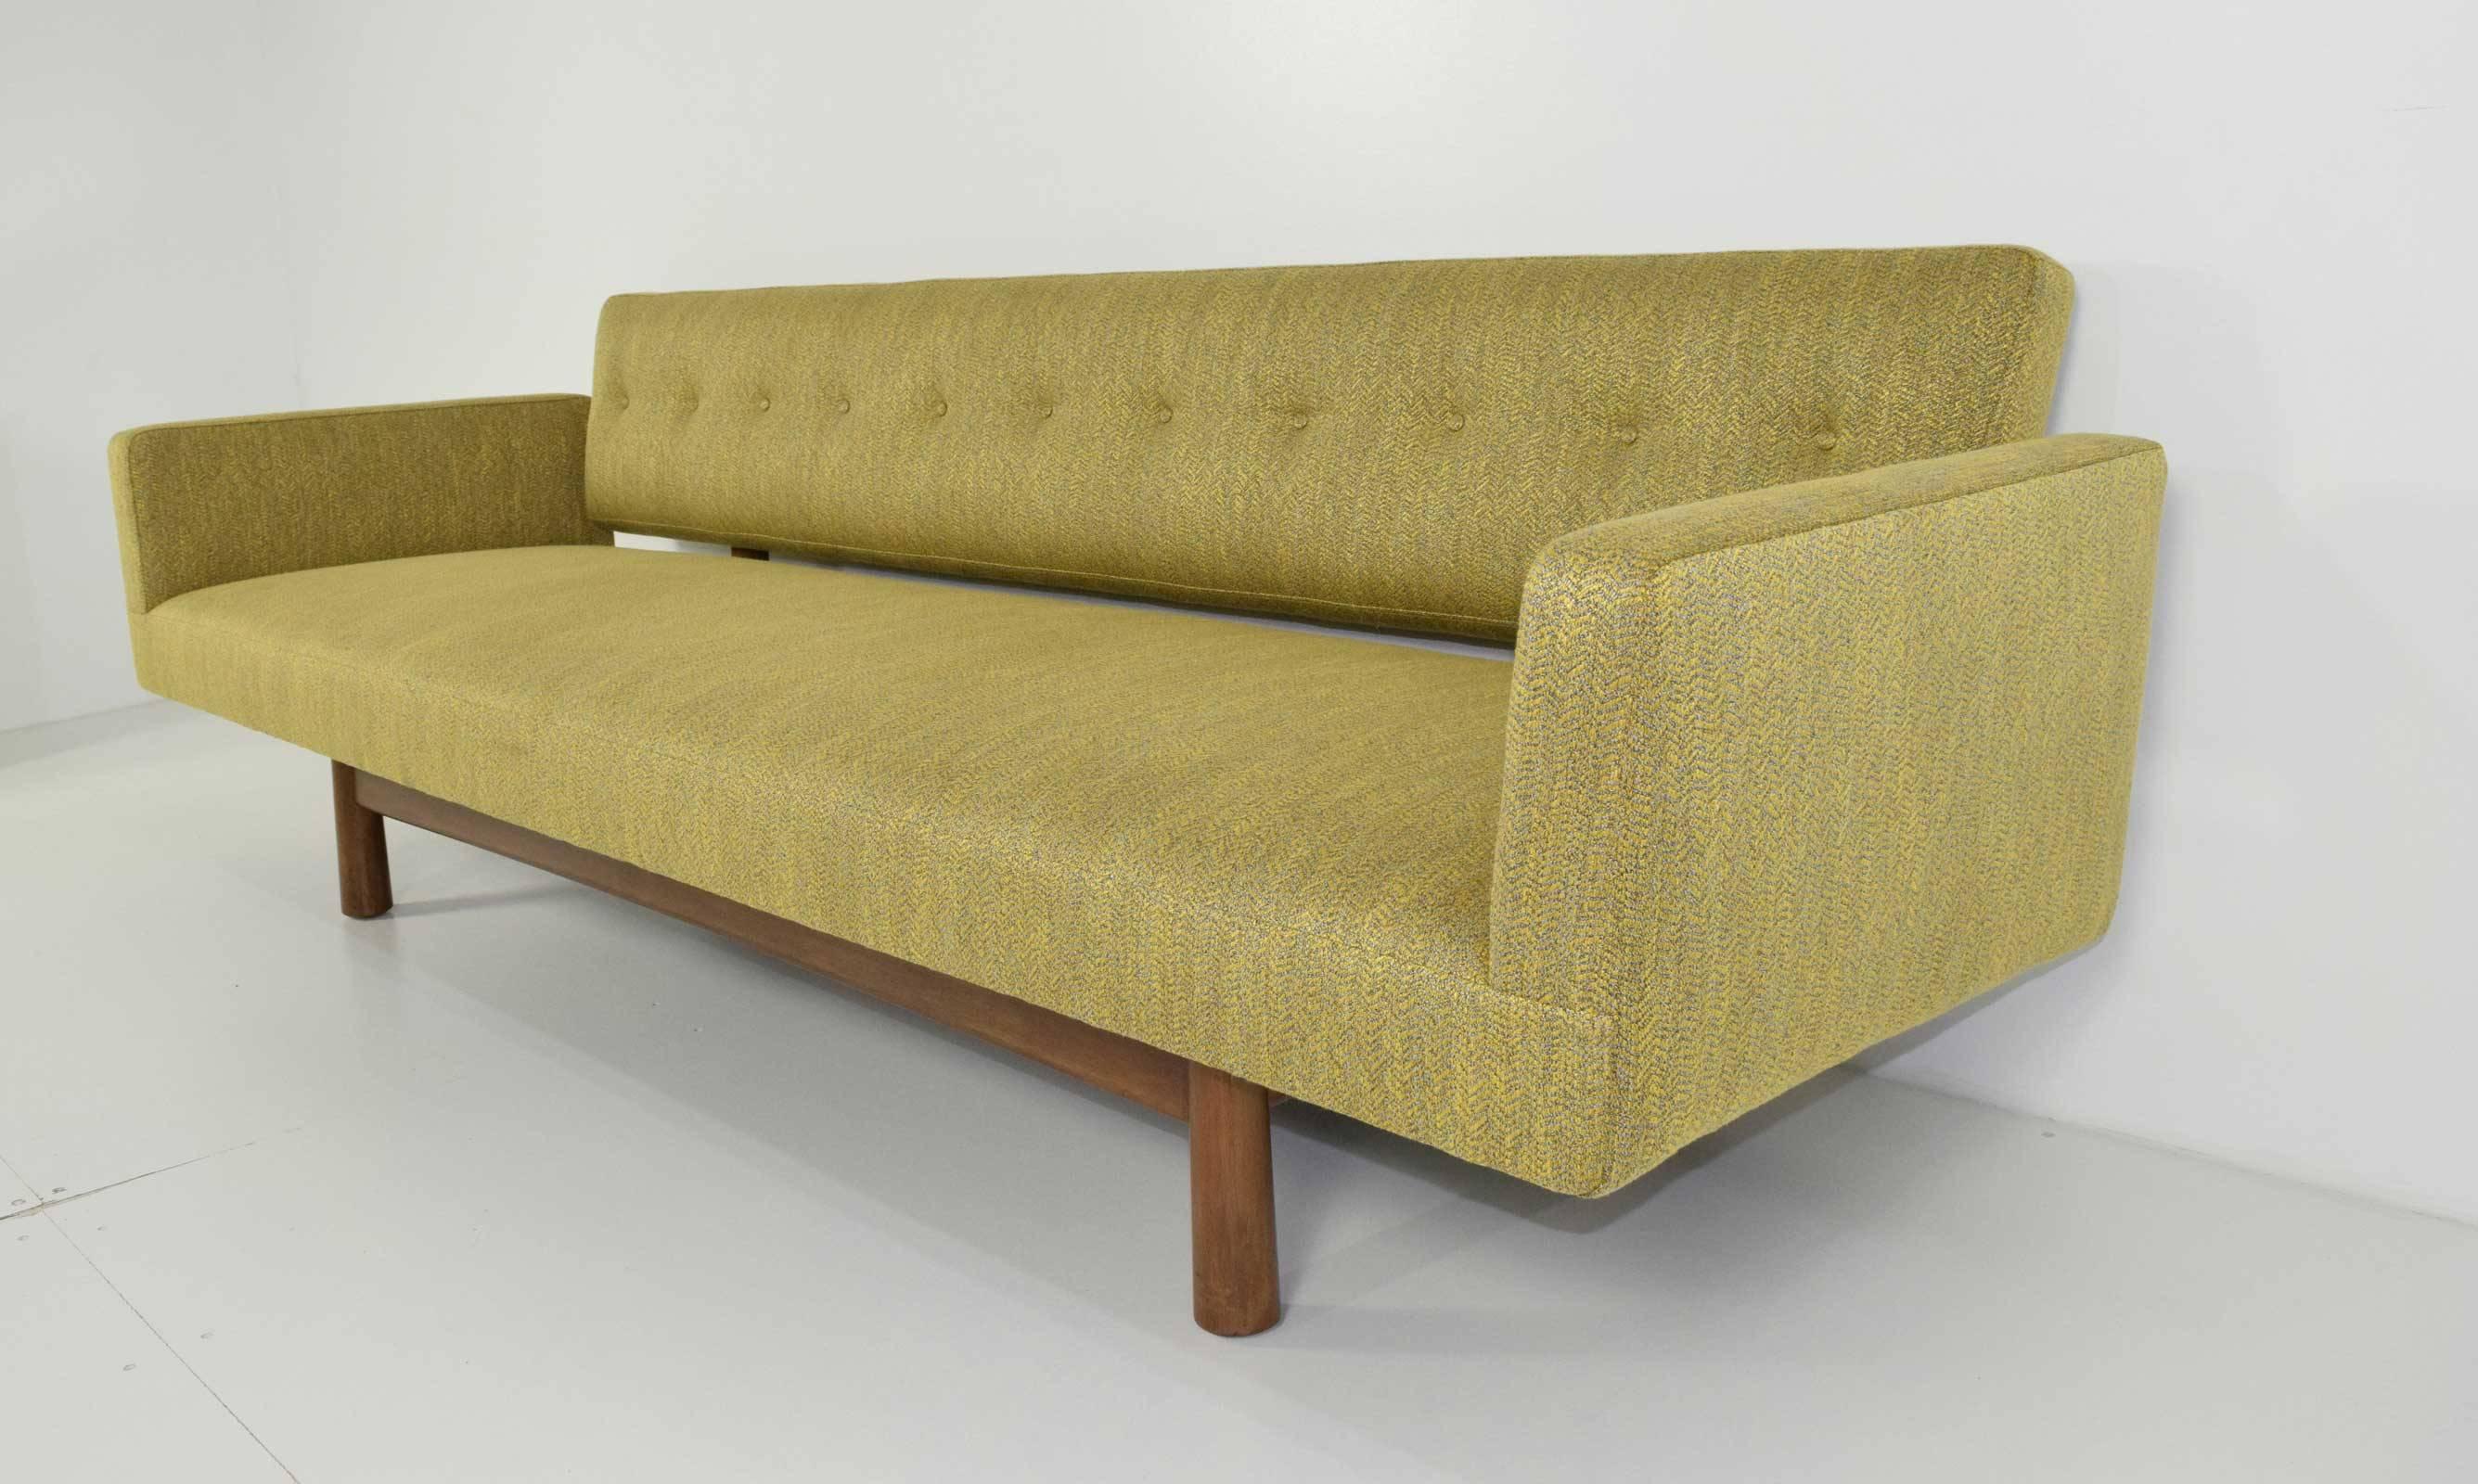 Quality construction, fully restored. Beautiful #5316 sofa by Edward Wormley for Dunbar. In Ligne Roset upholstery. Mahogany frame, brass fittings. This sofa is beautiful from any angle.